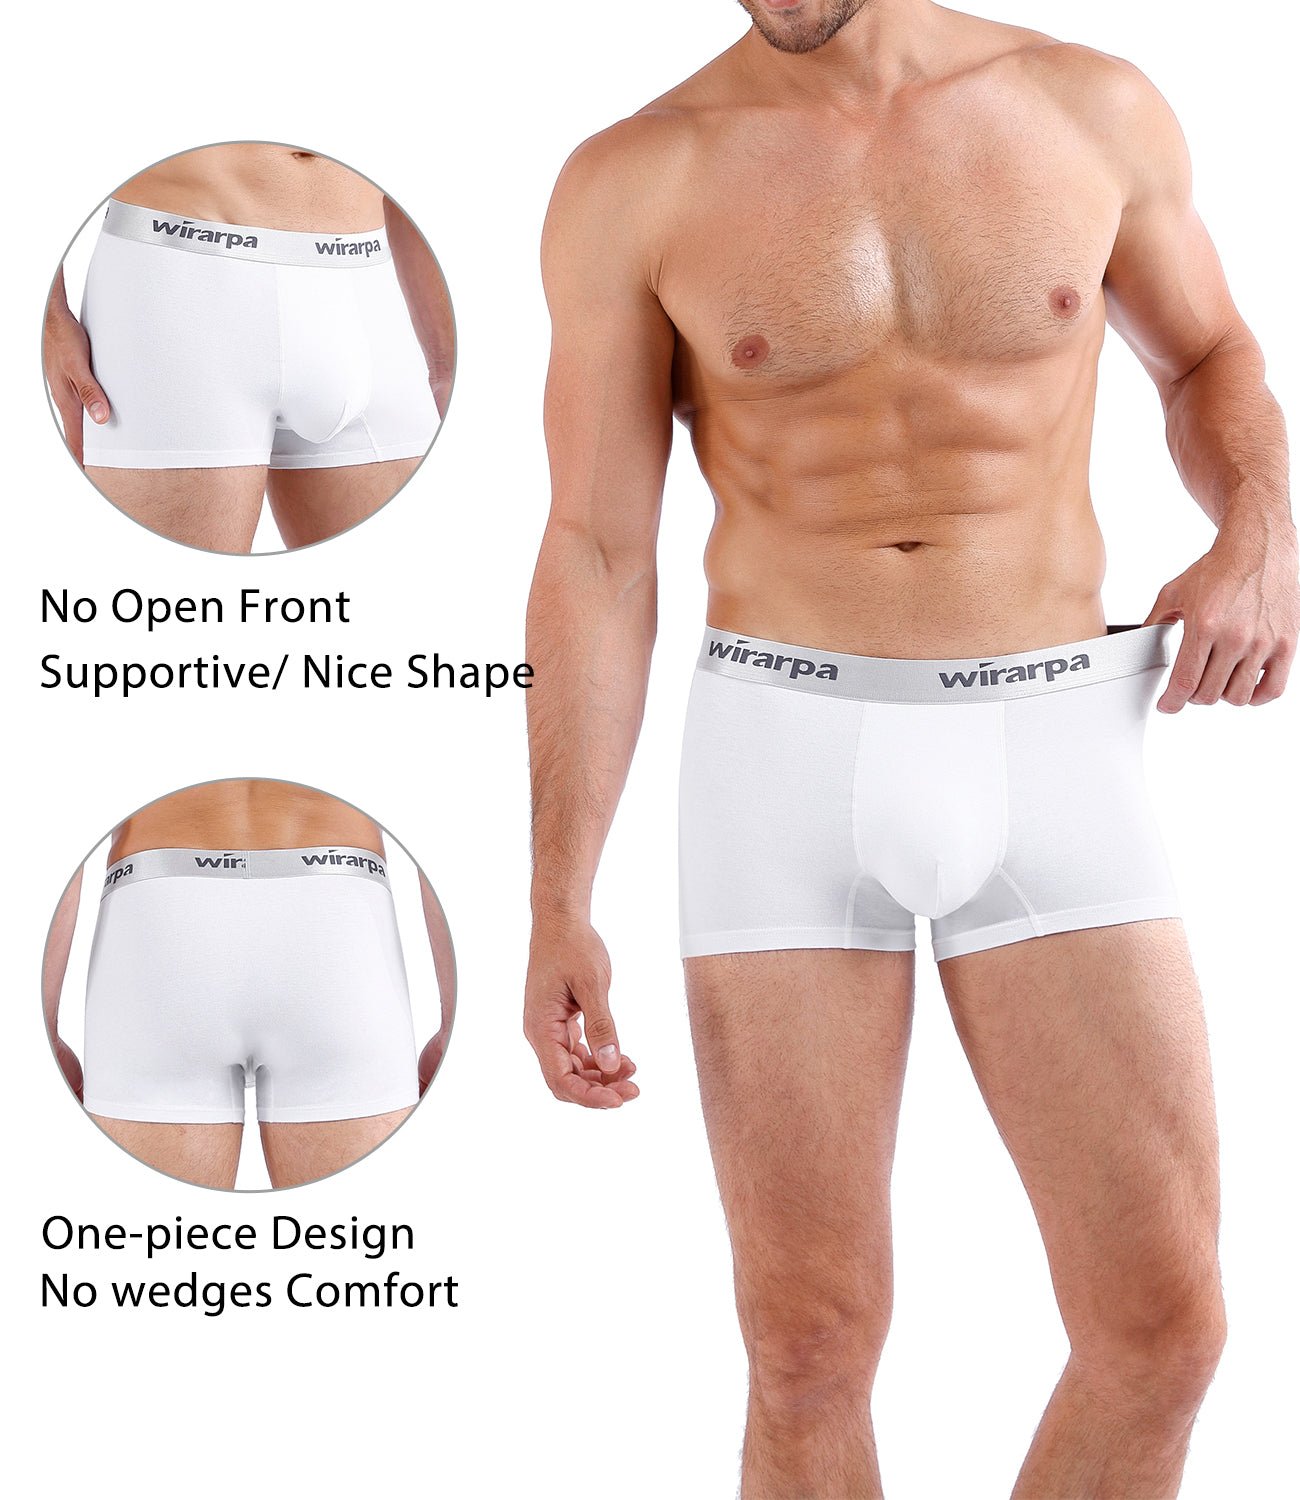 wirarpa Men’s Tagless Cotton Stretch Trunks with Wide Waistband 4 Pack - Wirarpa Apparel, Inc.